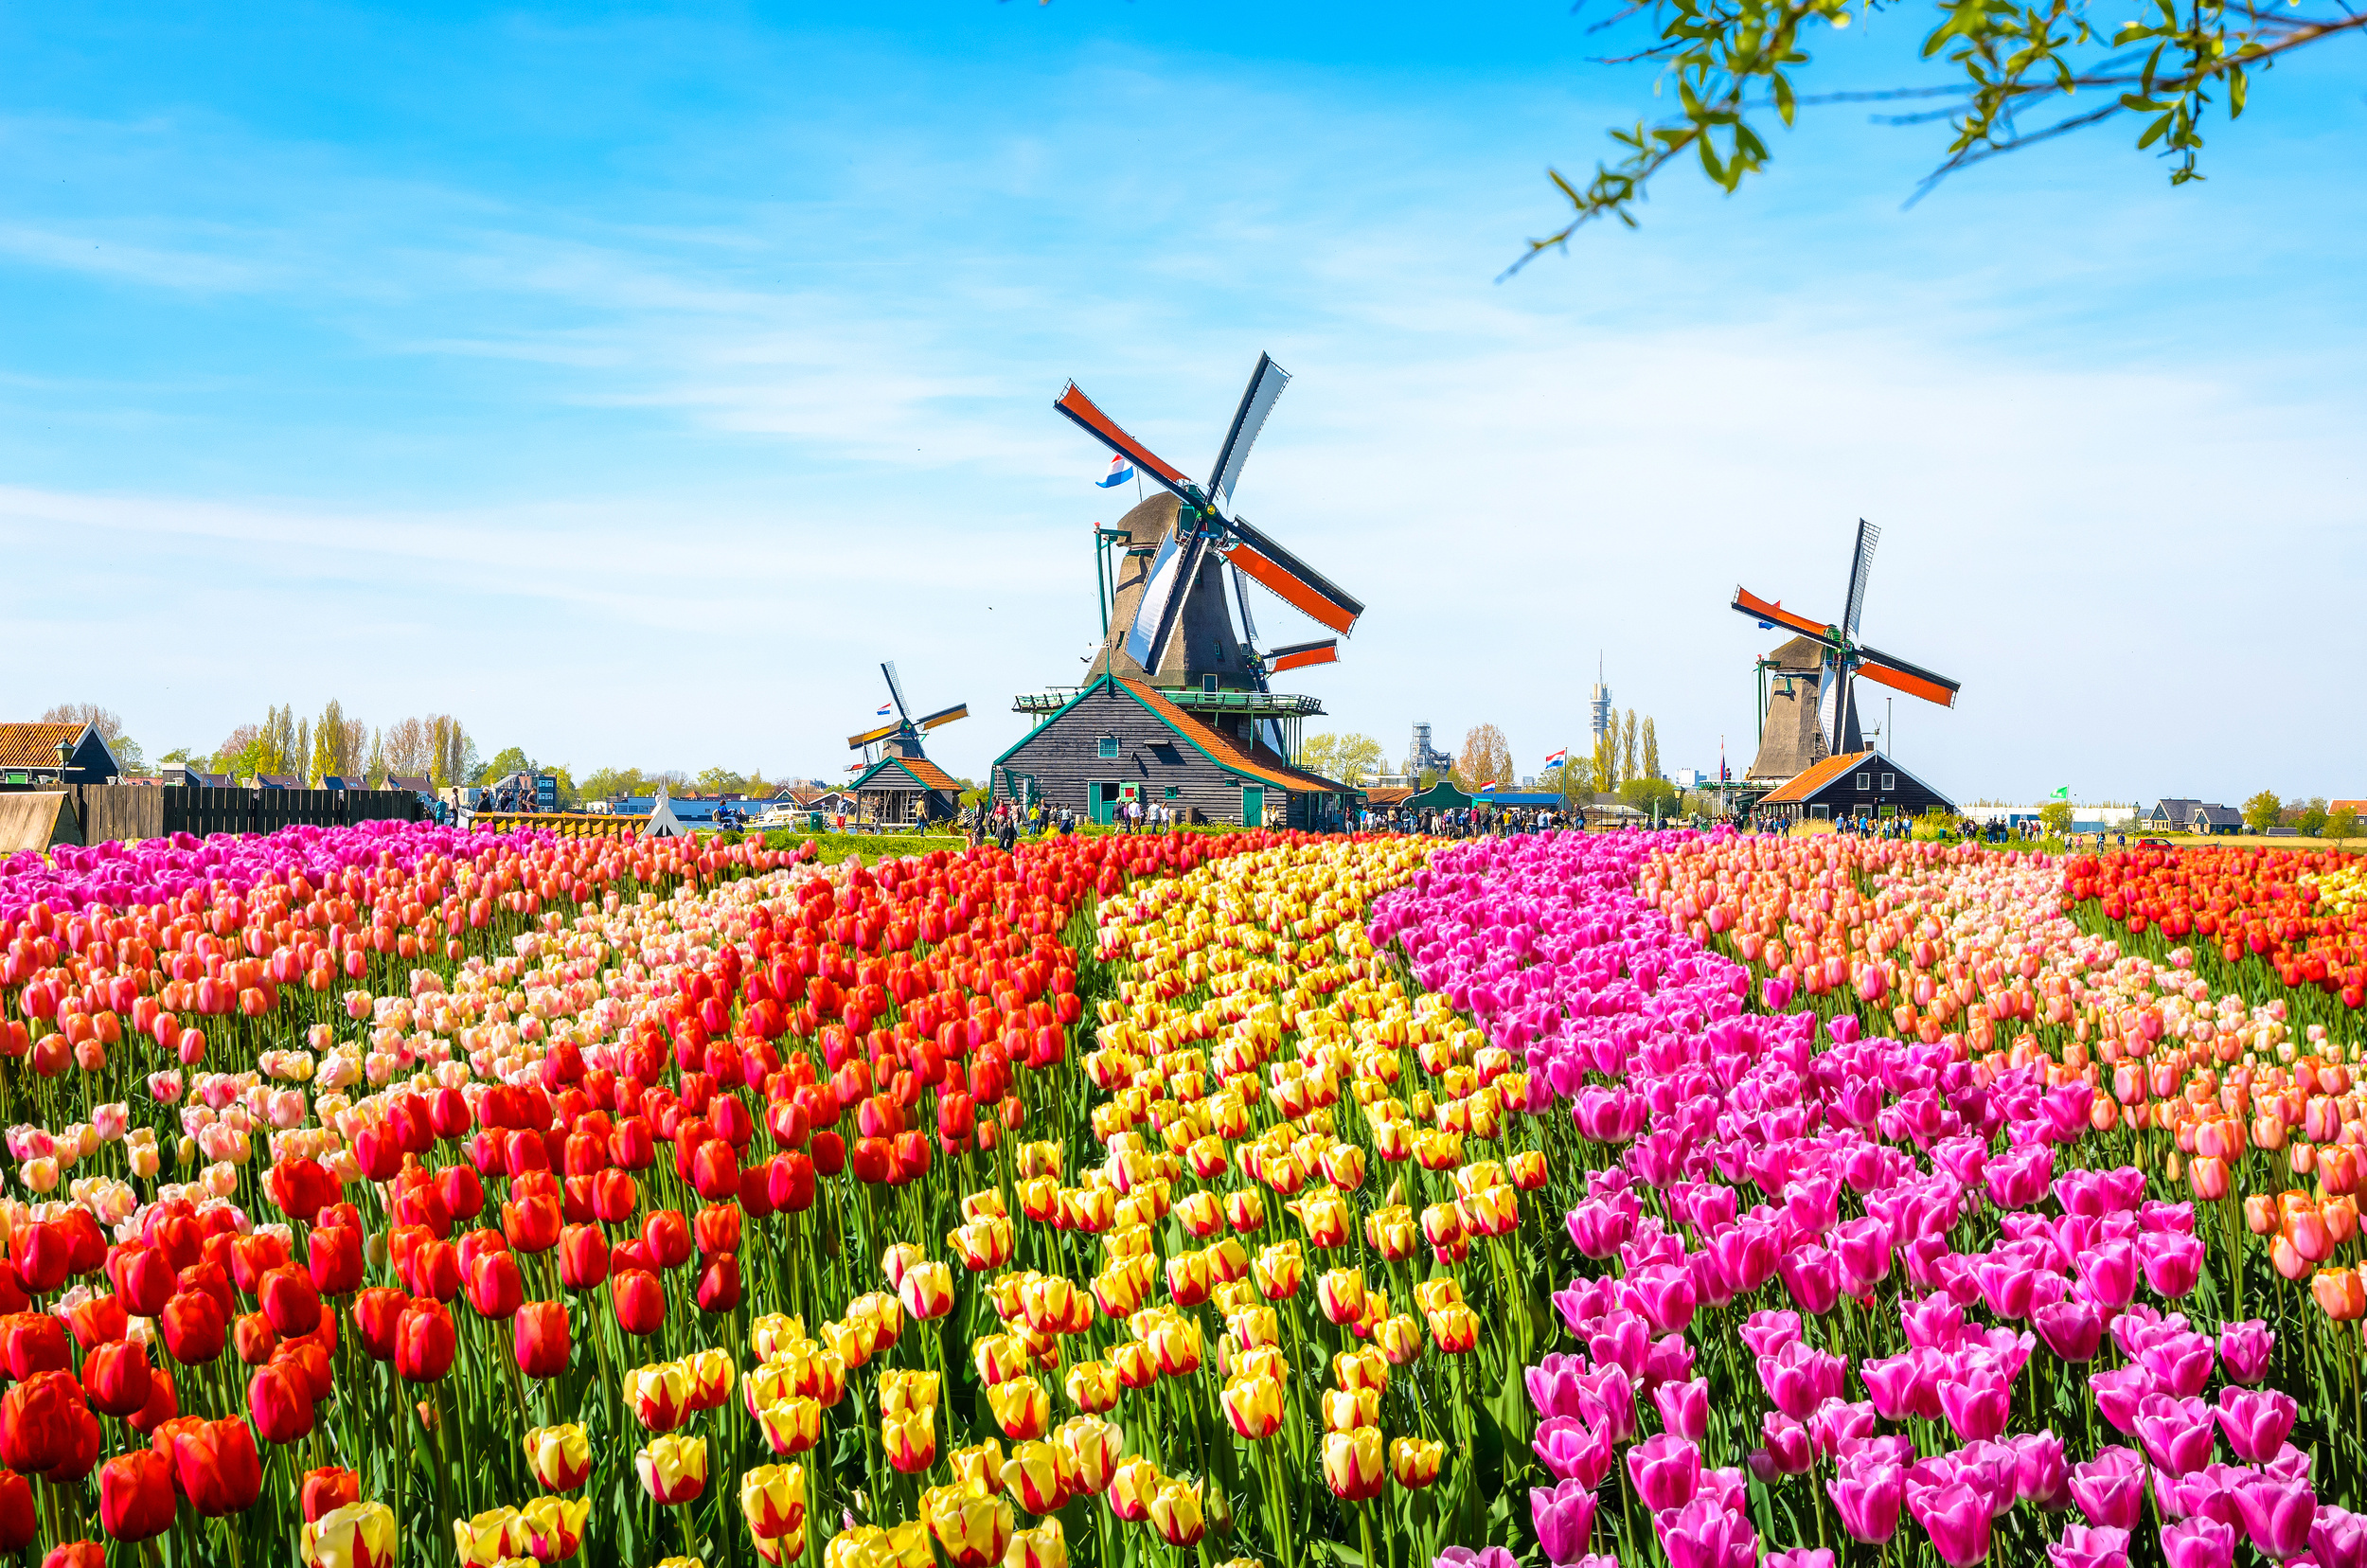 <p>Amsterdam is famous for nightlife and culture, but don’t forget how the rest of the country comes alive in the spring. There are numerous colorful fields, just a train and bike ride away from the capital. Remember to go in the morning before the lines pile up!</p><p>You may also like: <a href='https://www.yardbarker.com/lifestyle/articles/12_high_fat_foods_you_should_avoid_and_12_you_should_eat_regularly_021224/s1__39147466'>12 high-fat foods you should avoid and 12 you should eat regularly</a></p>